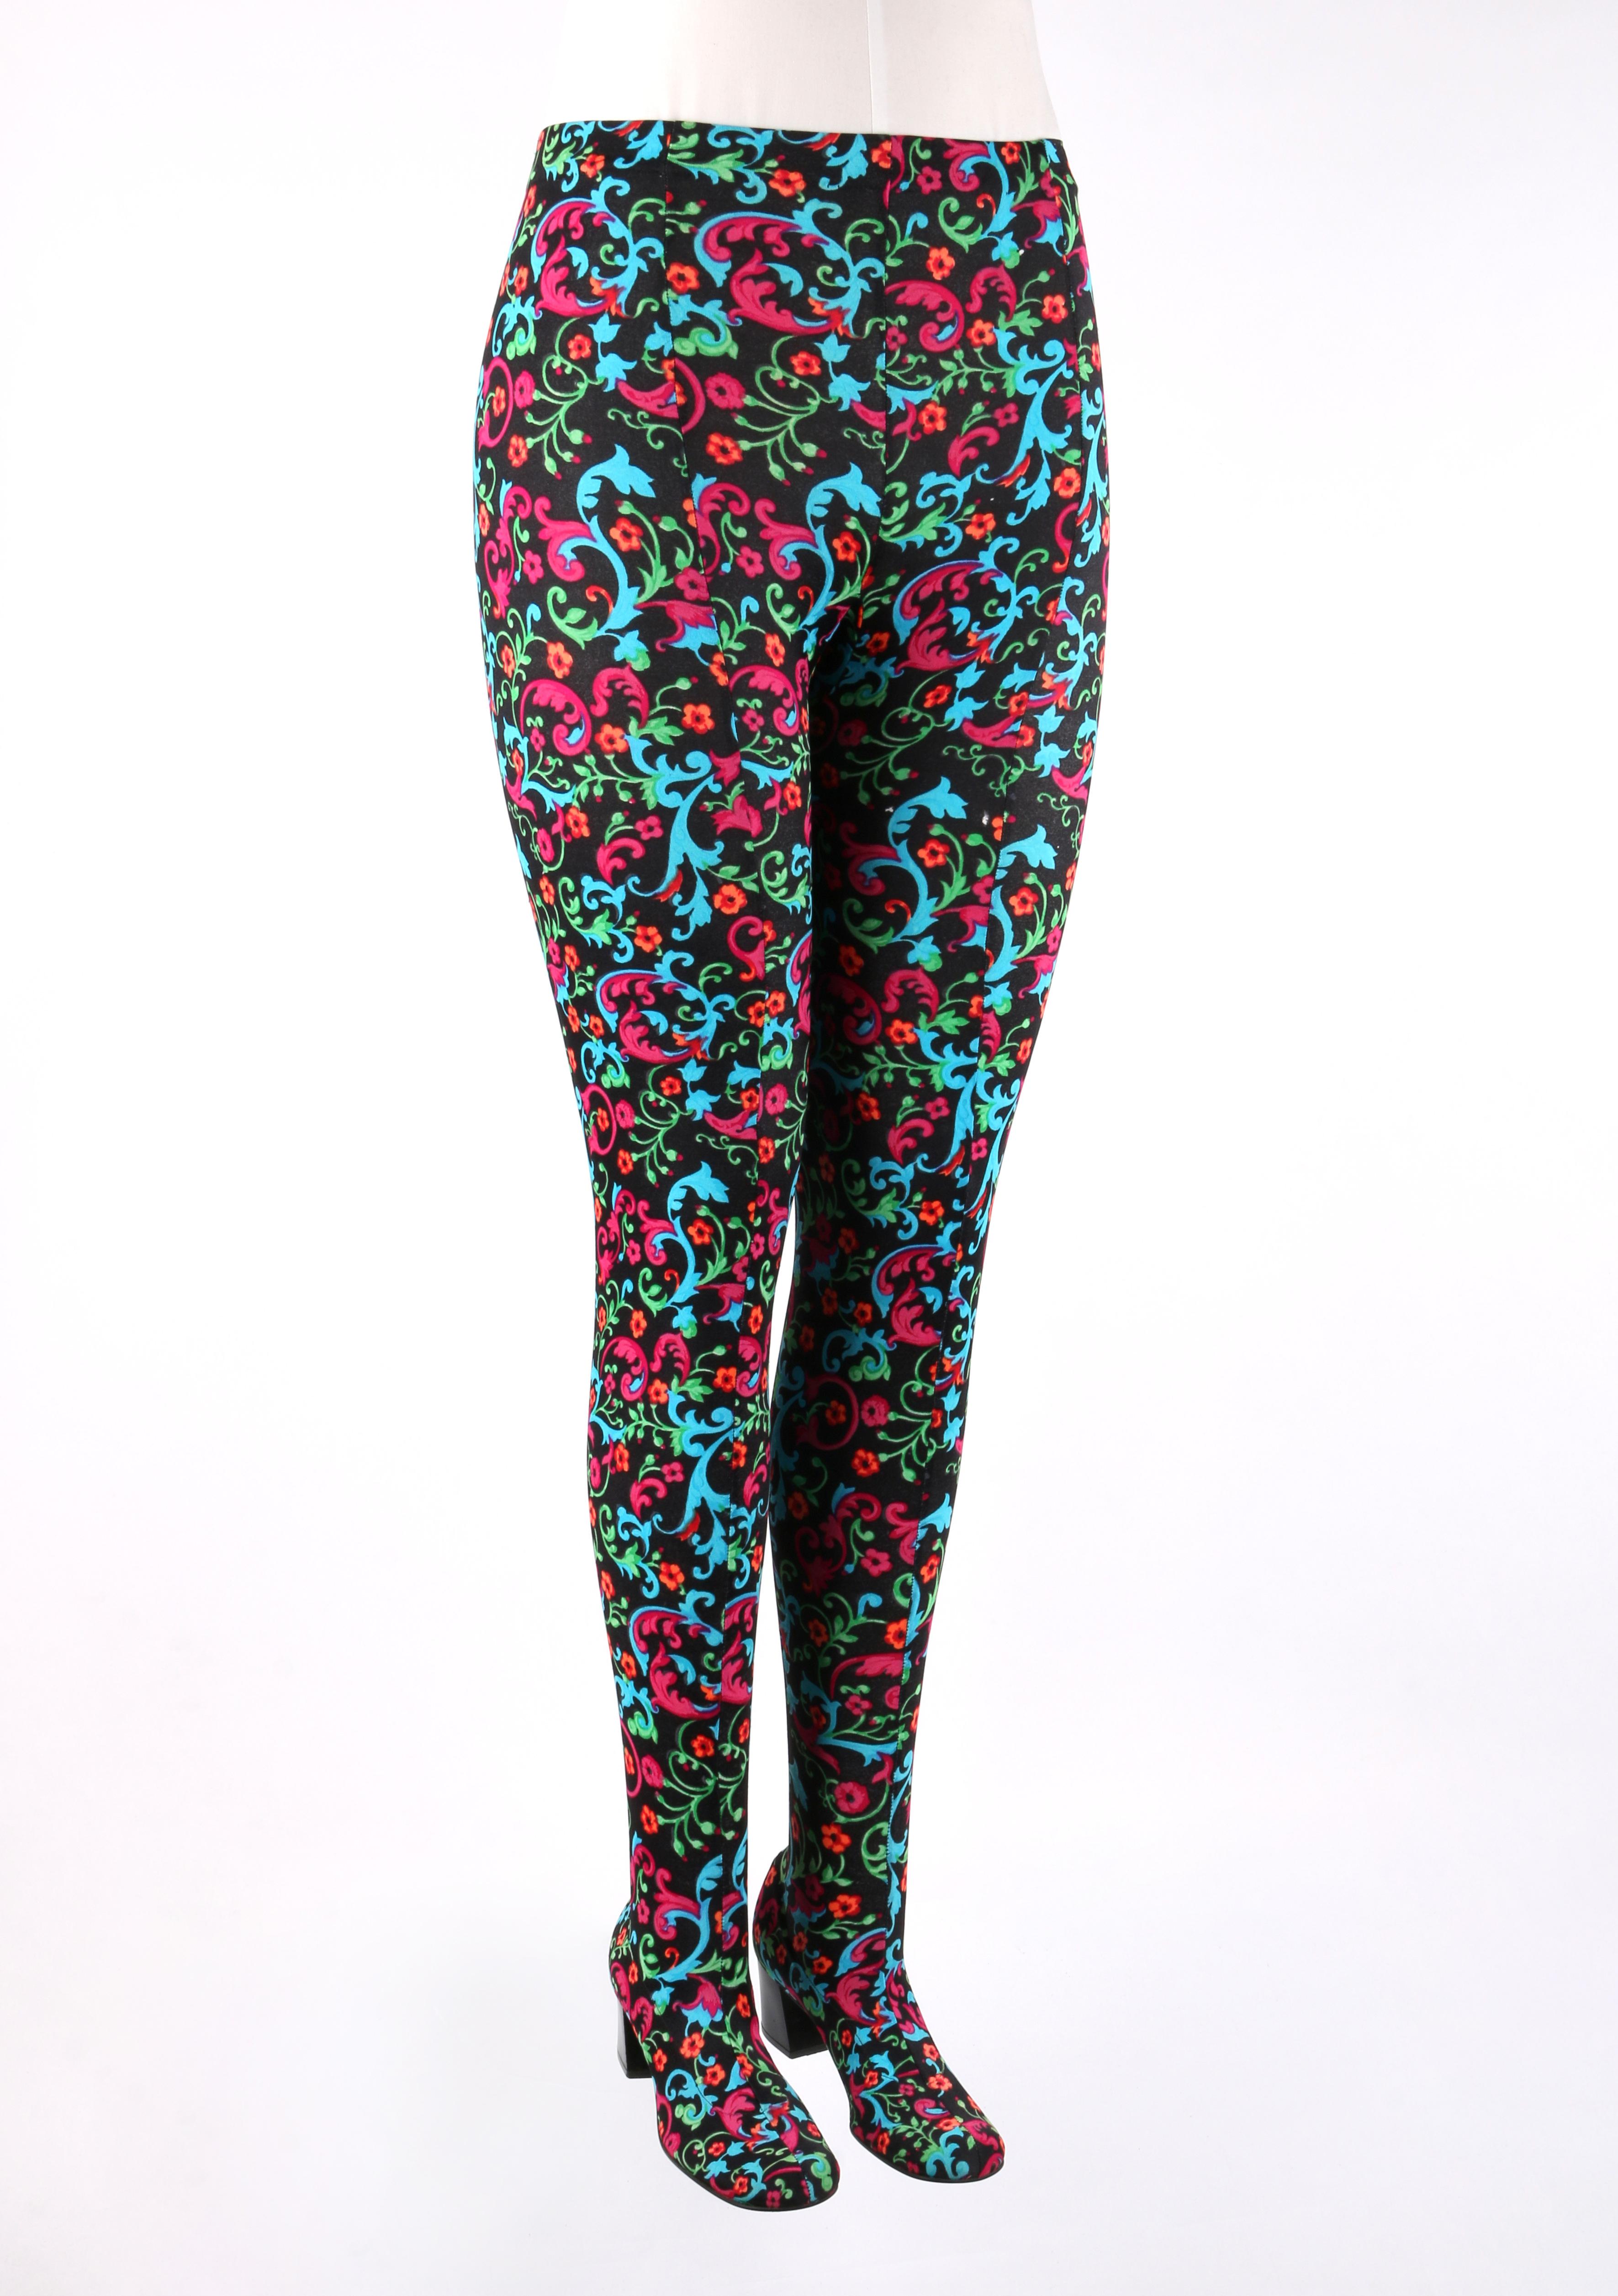 DESCRIPTION: PAN-T-BOOTS c.1960s Floral Filigree Print Stretch High Waist Leggings Pant Boots
 
Circa: c.1960’s
Designer: Suzanne Garfield
Style: Leggings / Pant boots
Color(s): Multi in shades of black, teal blue, green, orange, red, and magenta.